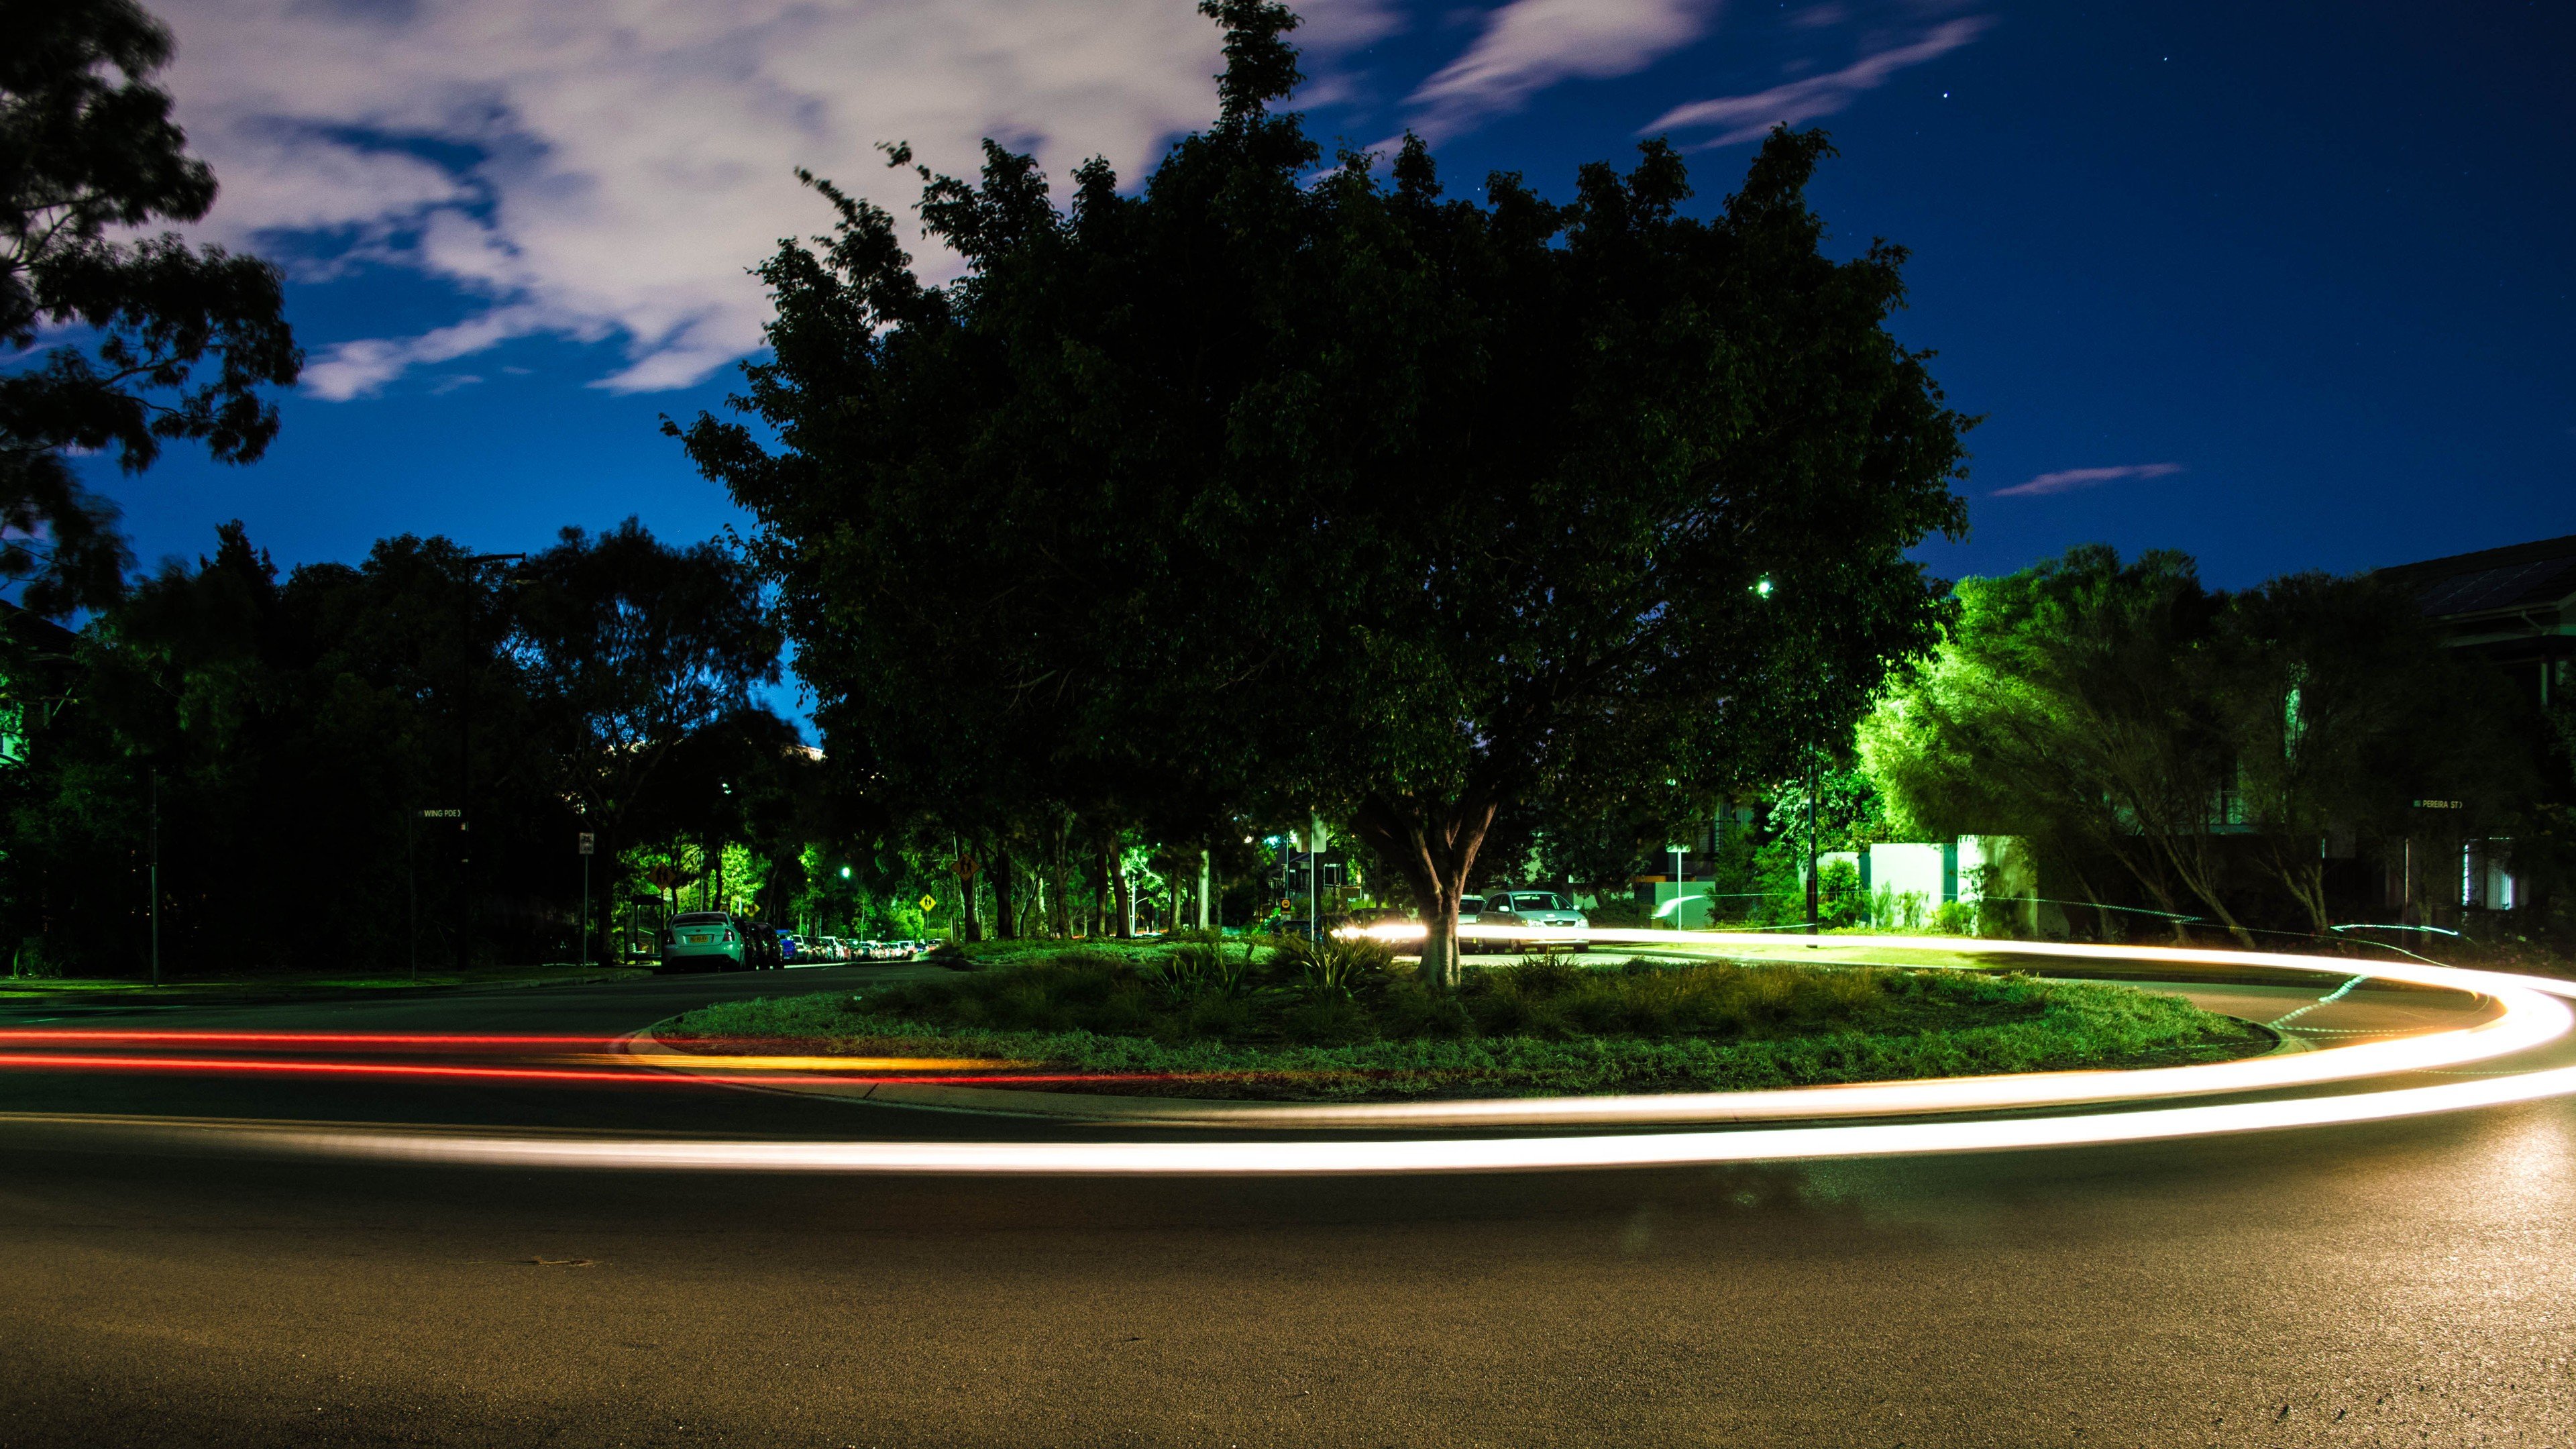 roundabouts, Long exposure, Road, Trees, Night, HDR, Lights Wallpaper